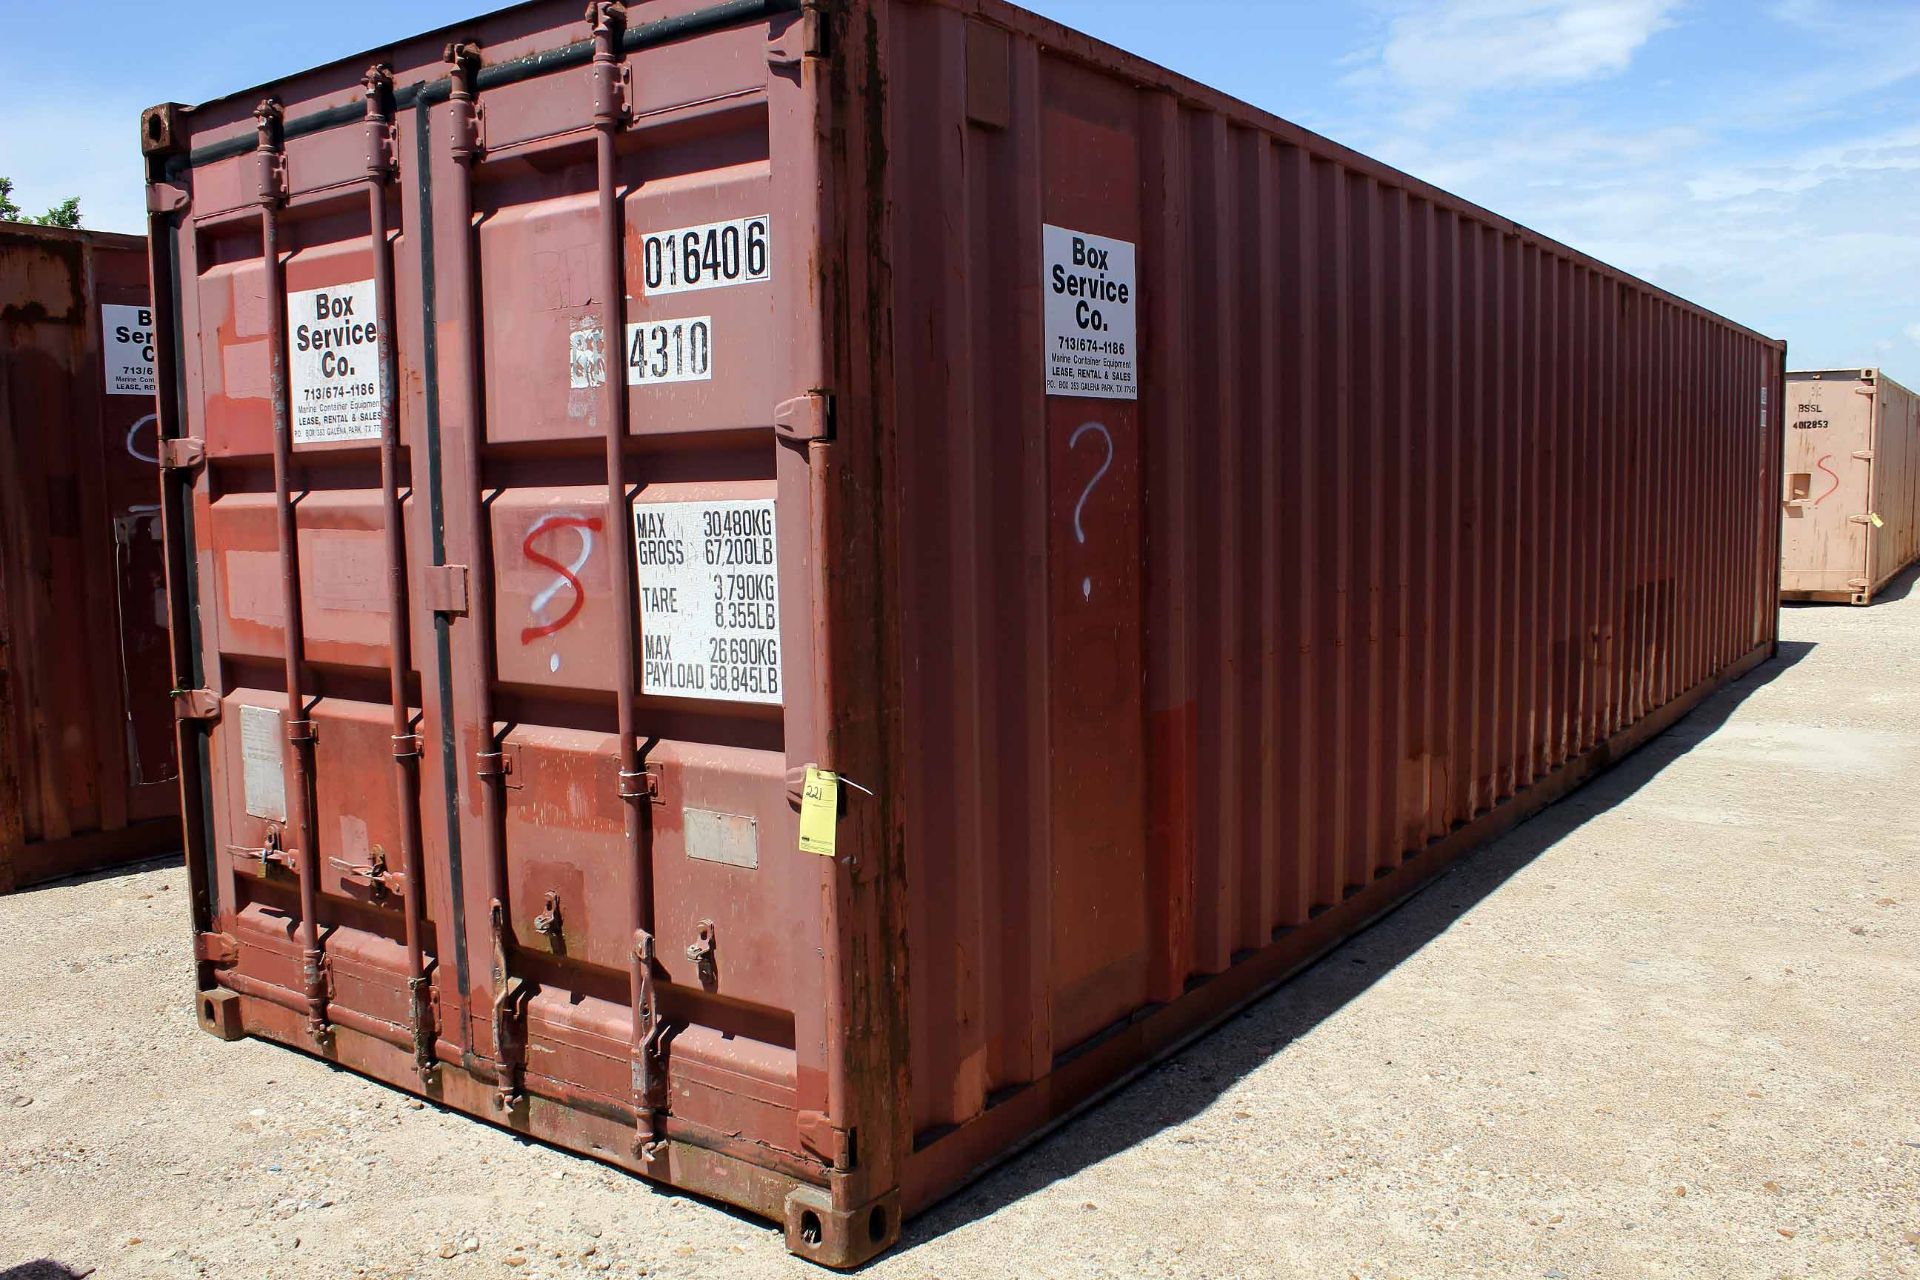 STEEL STORAGE CONTAINER, 40'L. x 96"W. x 8' ht., dbl. swing-out front doors (Unit 5016406-GB4310)